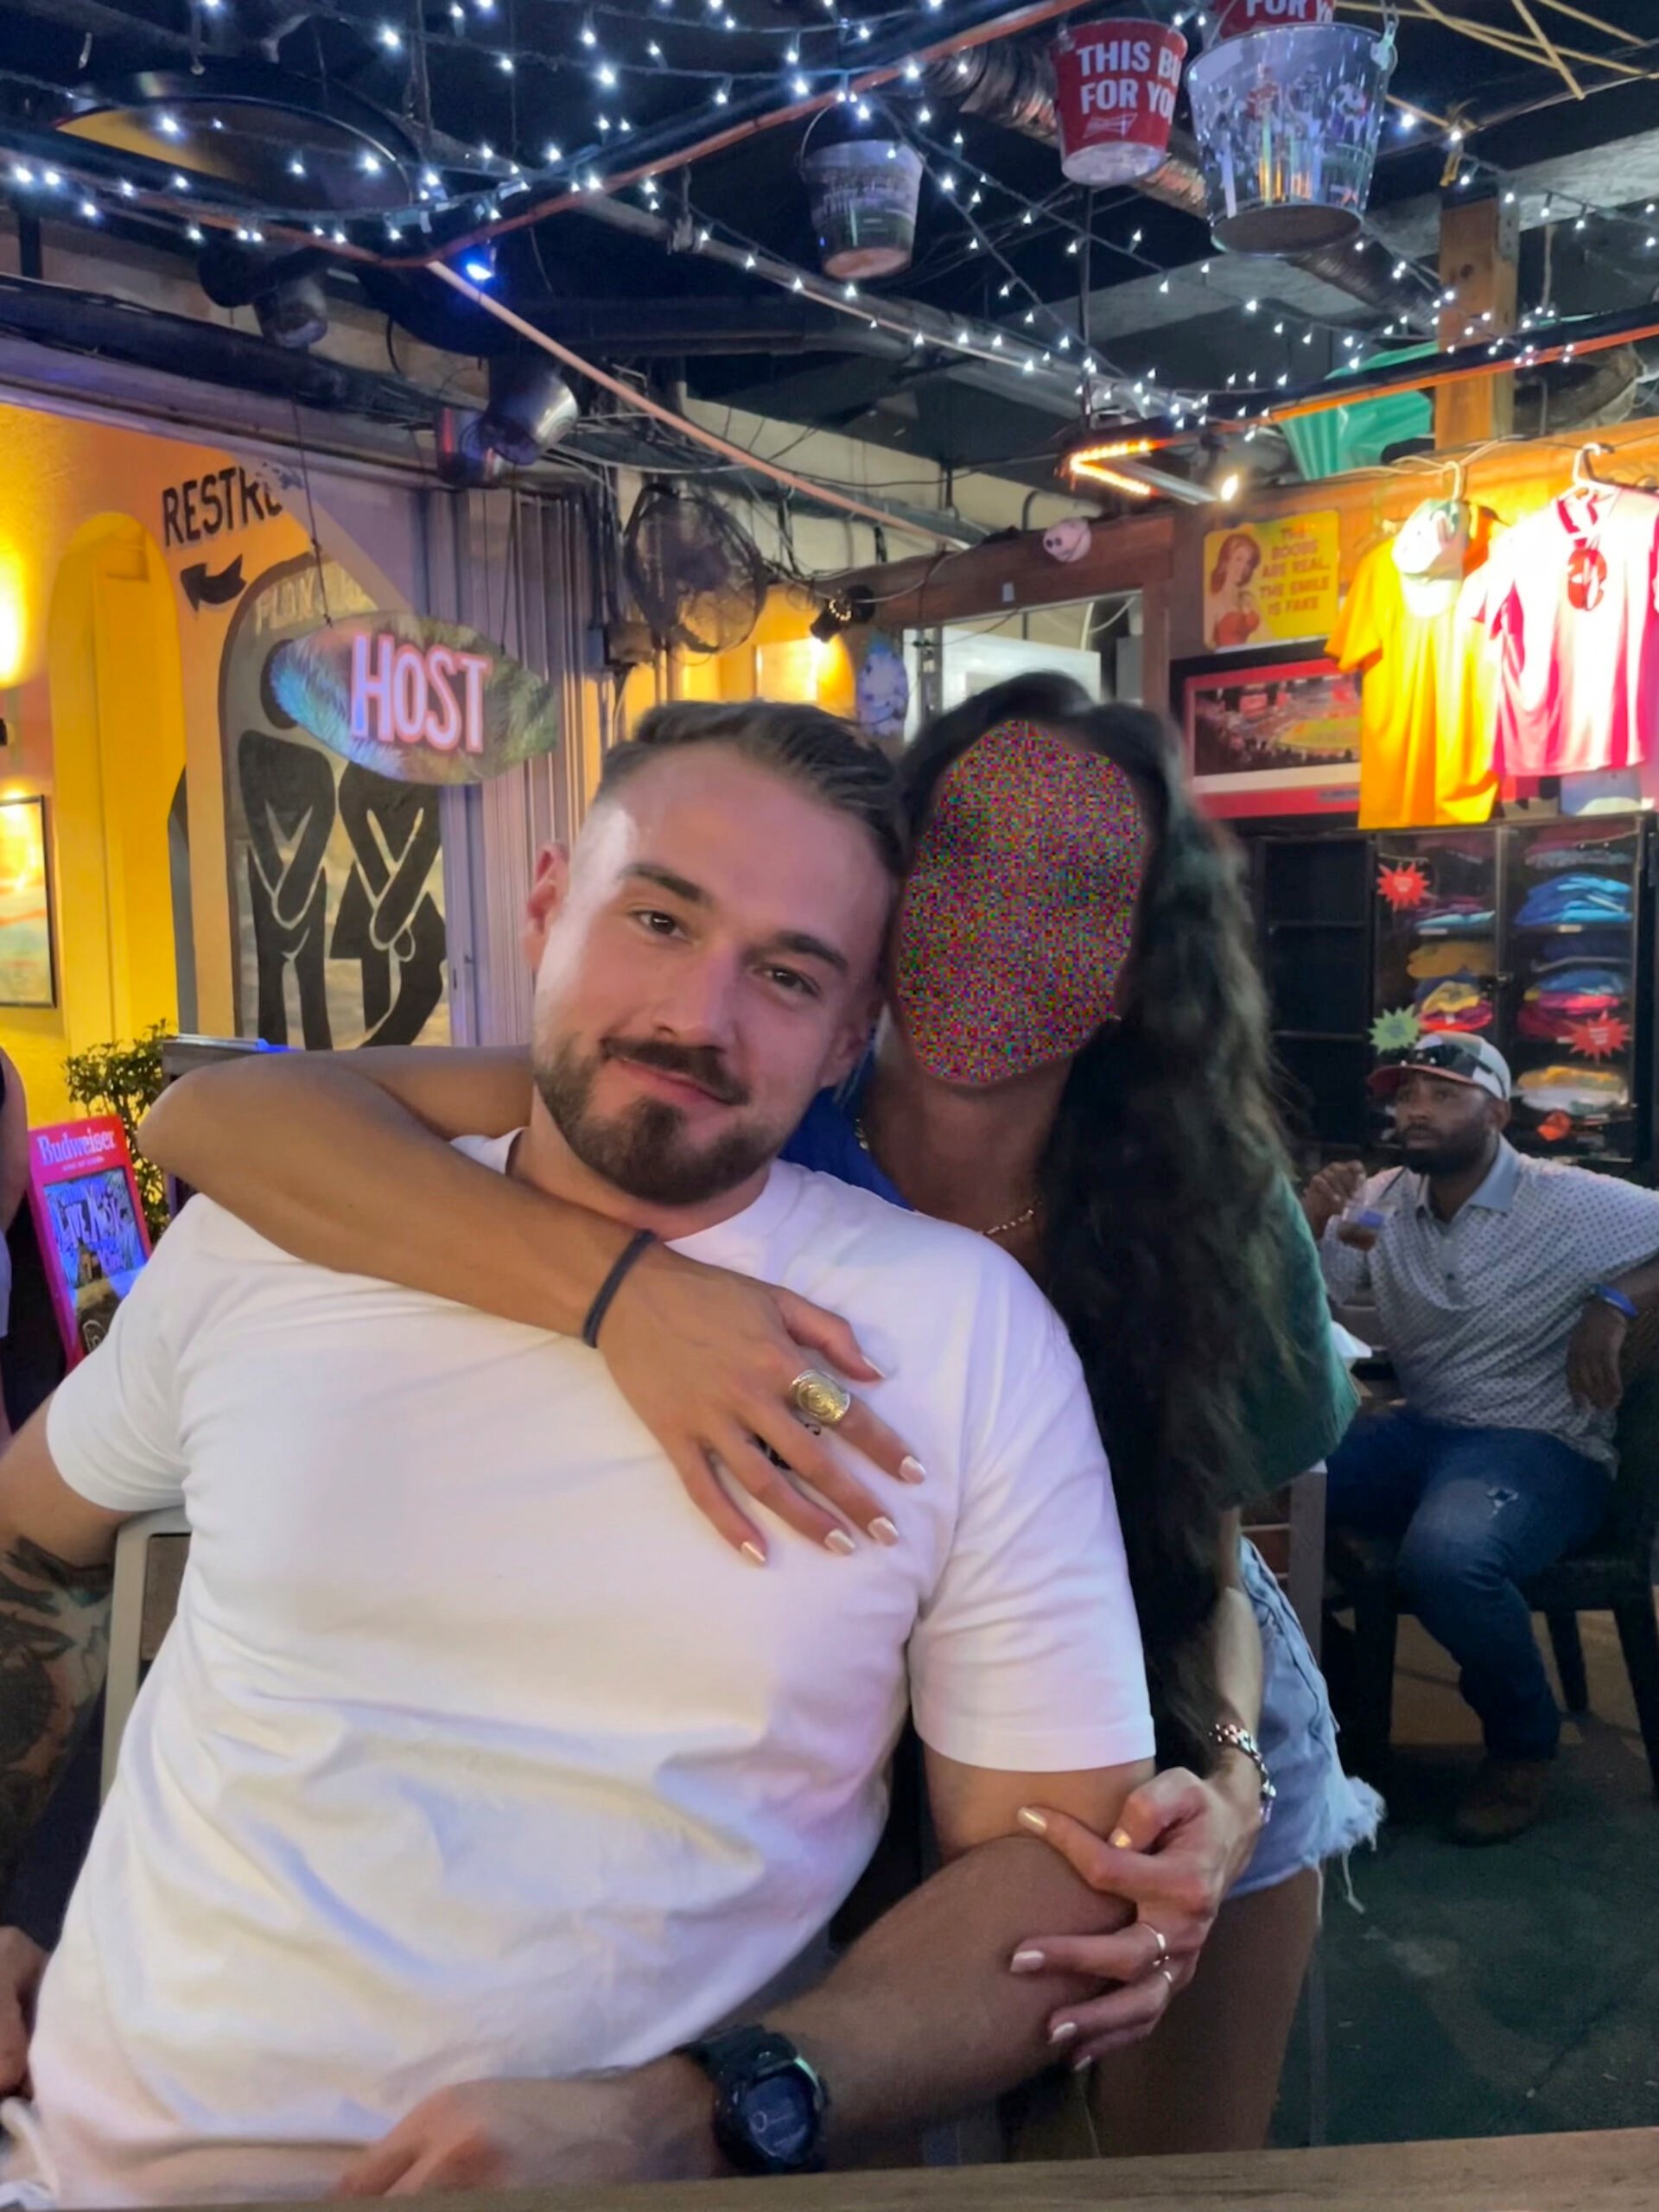 AJ Fisher and his fiancee (face blurred to protect her from retaliation) as they await his upcoming January 6th trial.